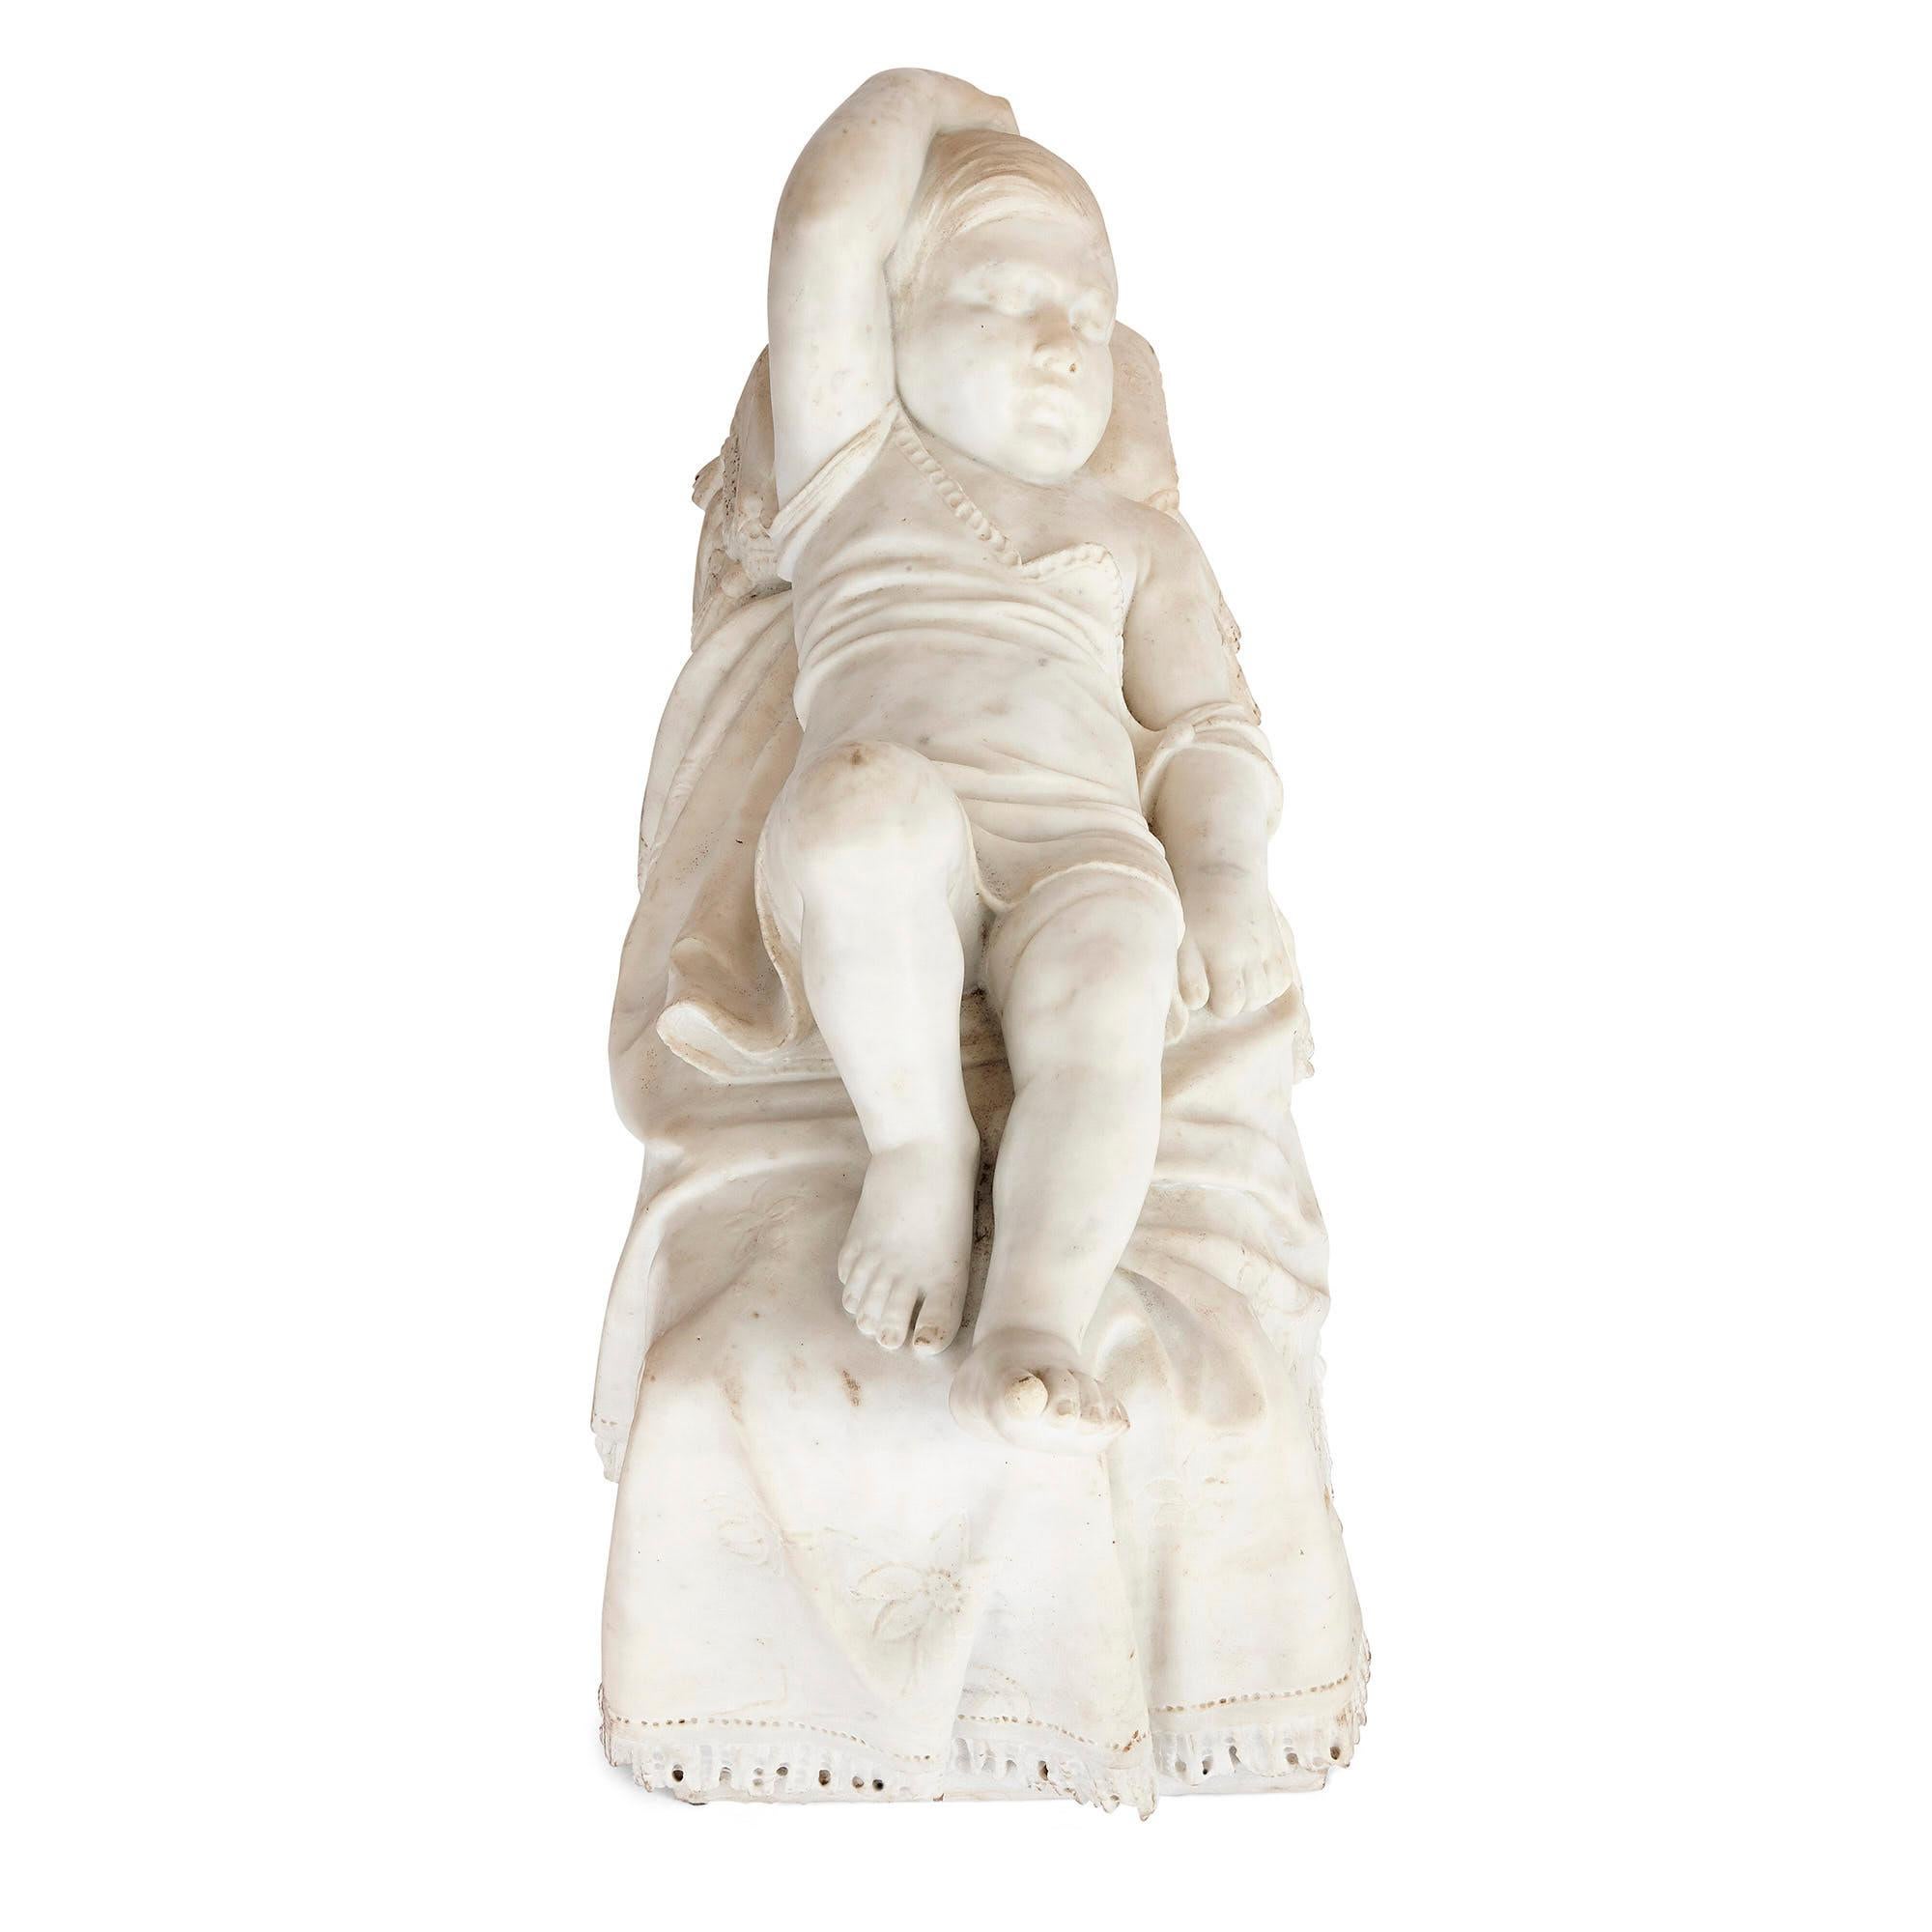 Antique 19th century Italian sculpture of a sleeping child
Italian, 19th century
Measures: Height 44cm, width 72cm, depth 30cm

This wonderful Italian sculpture is carved from white marble. The sculpture depicts a young child asleep atop a bed: